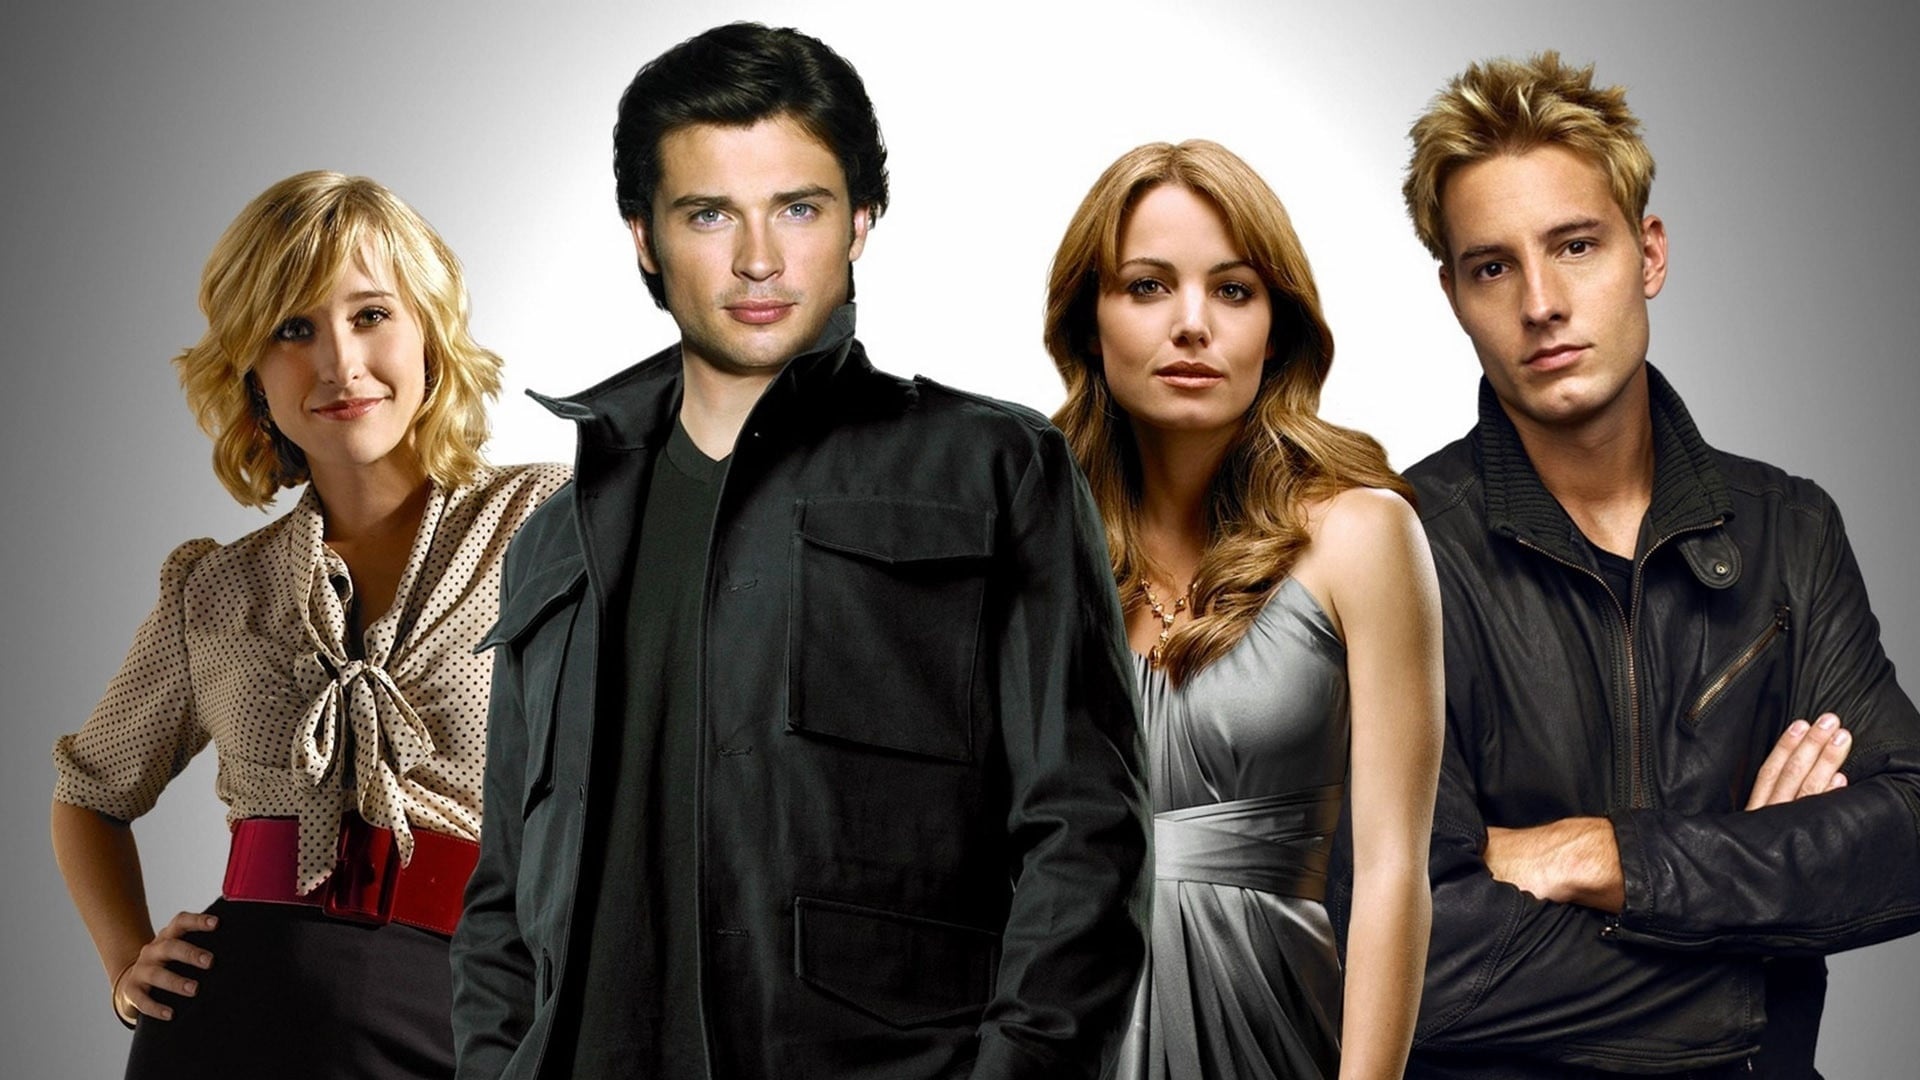 Smallville (TV Series): Season 9, 2009, Featuring Allison Mack, Tom Welling, Erica Durance and Justin Harley. 1920x1080 Full HD Background.